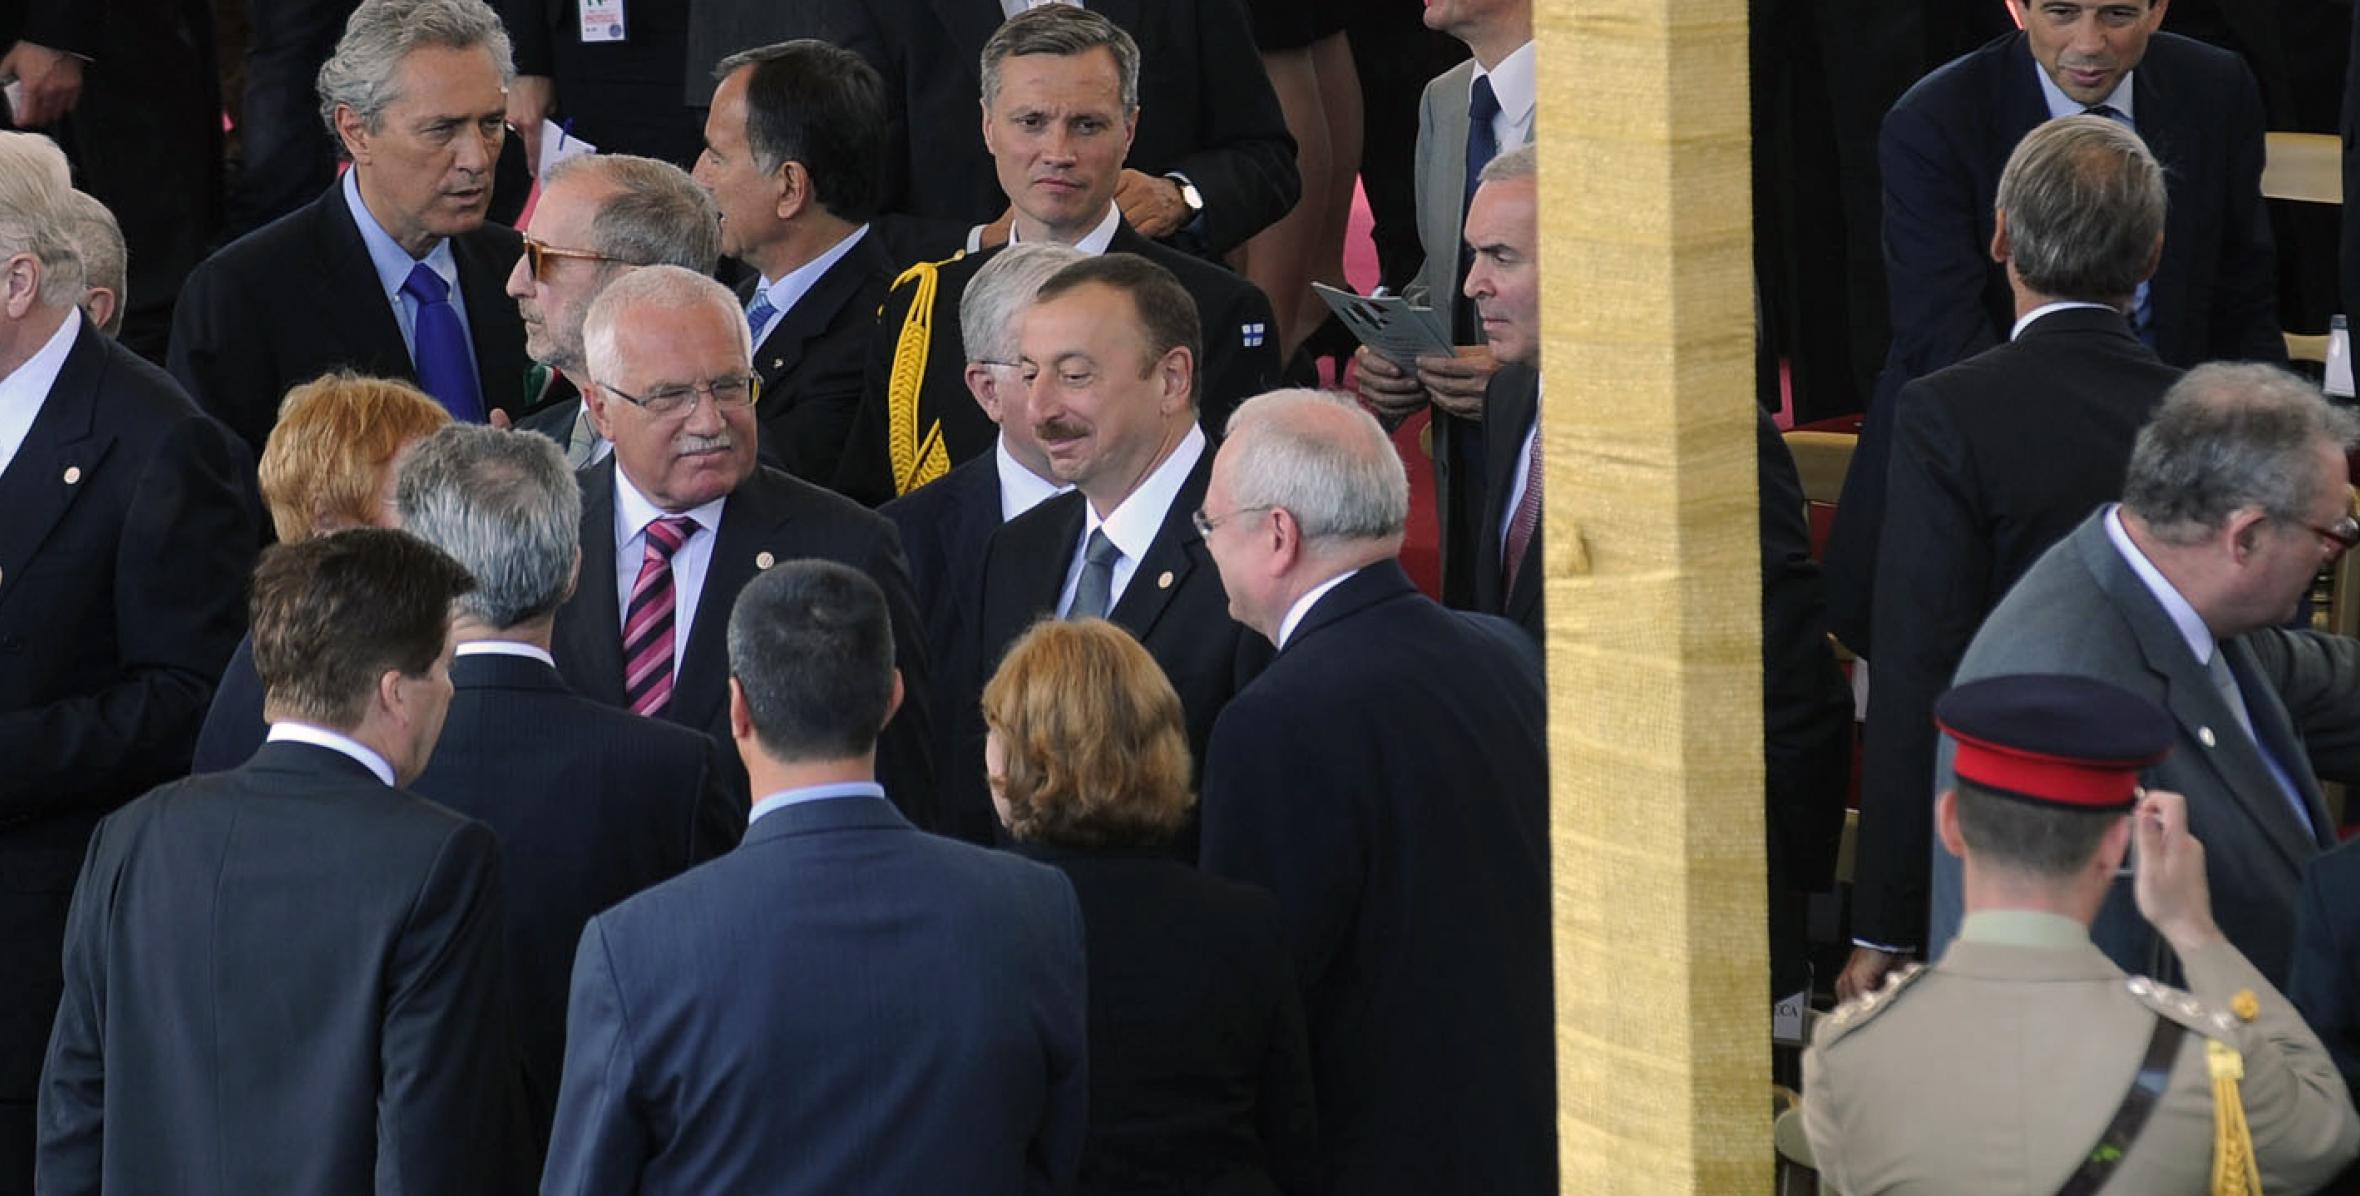 Ilham Aliyev watched the official parade, dedicated to the 150th anniversary of Unification of Italy and the 65th anniversary of the Republic of Italy